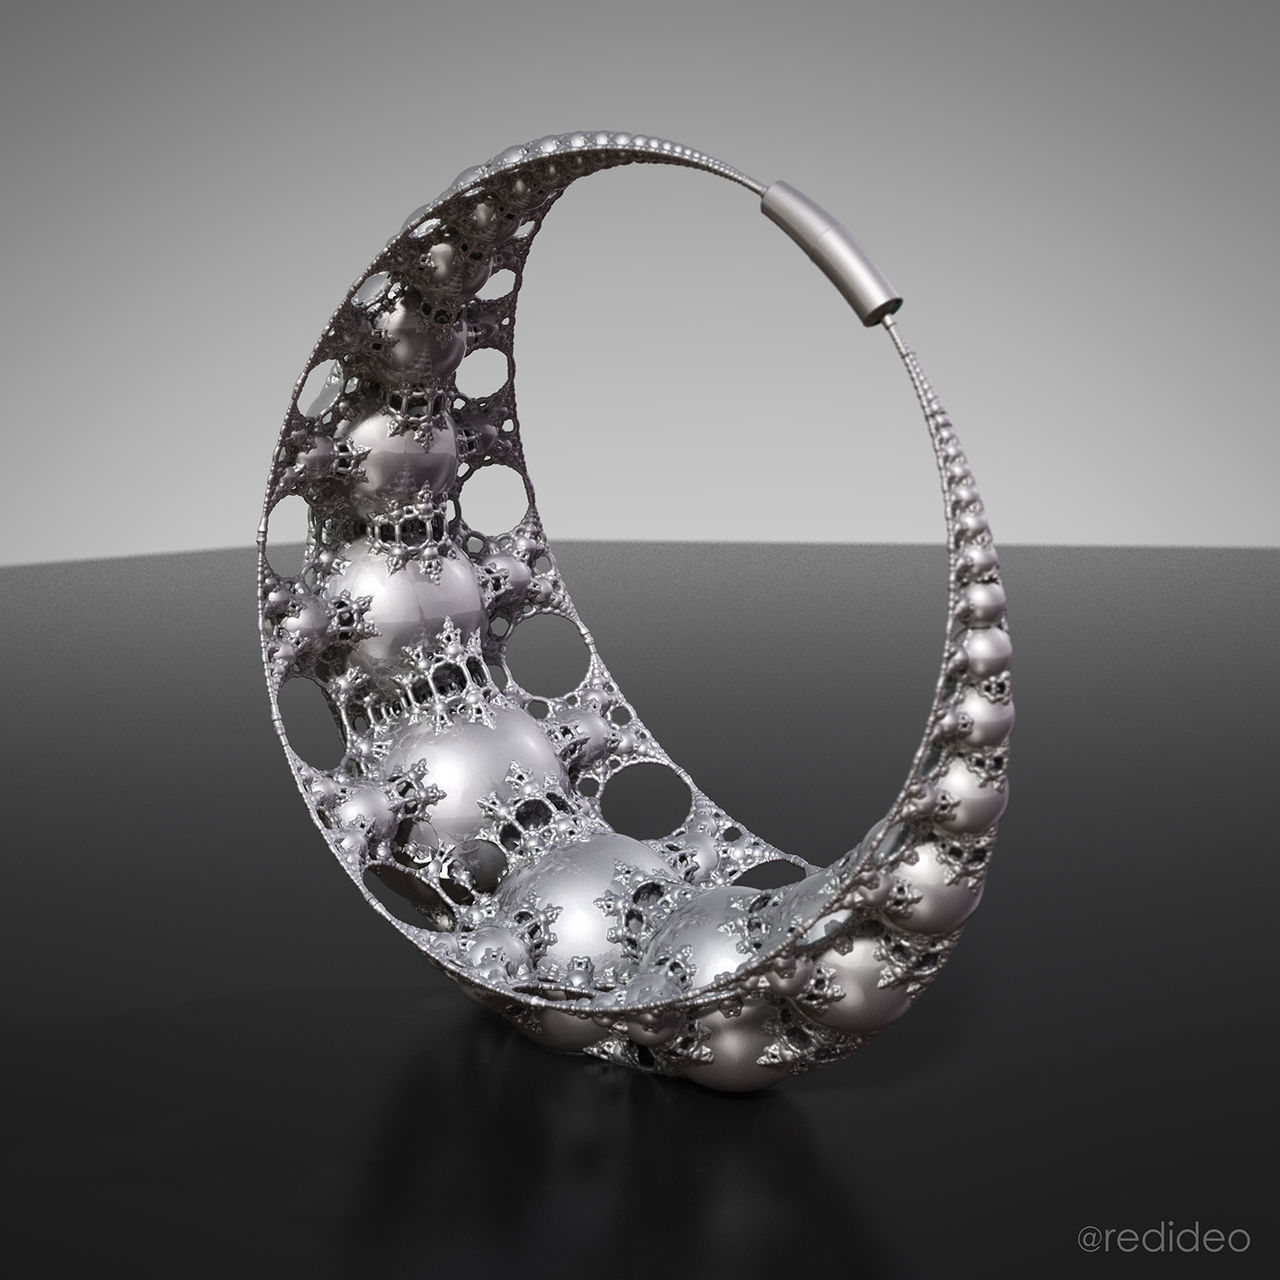 fractal material light study made w mandelbulber by redideo